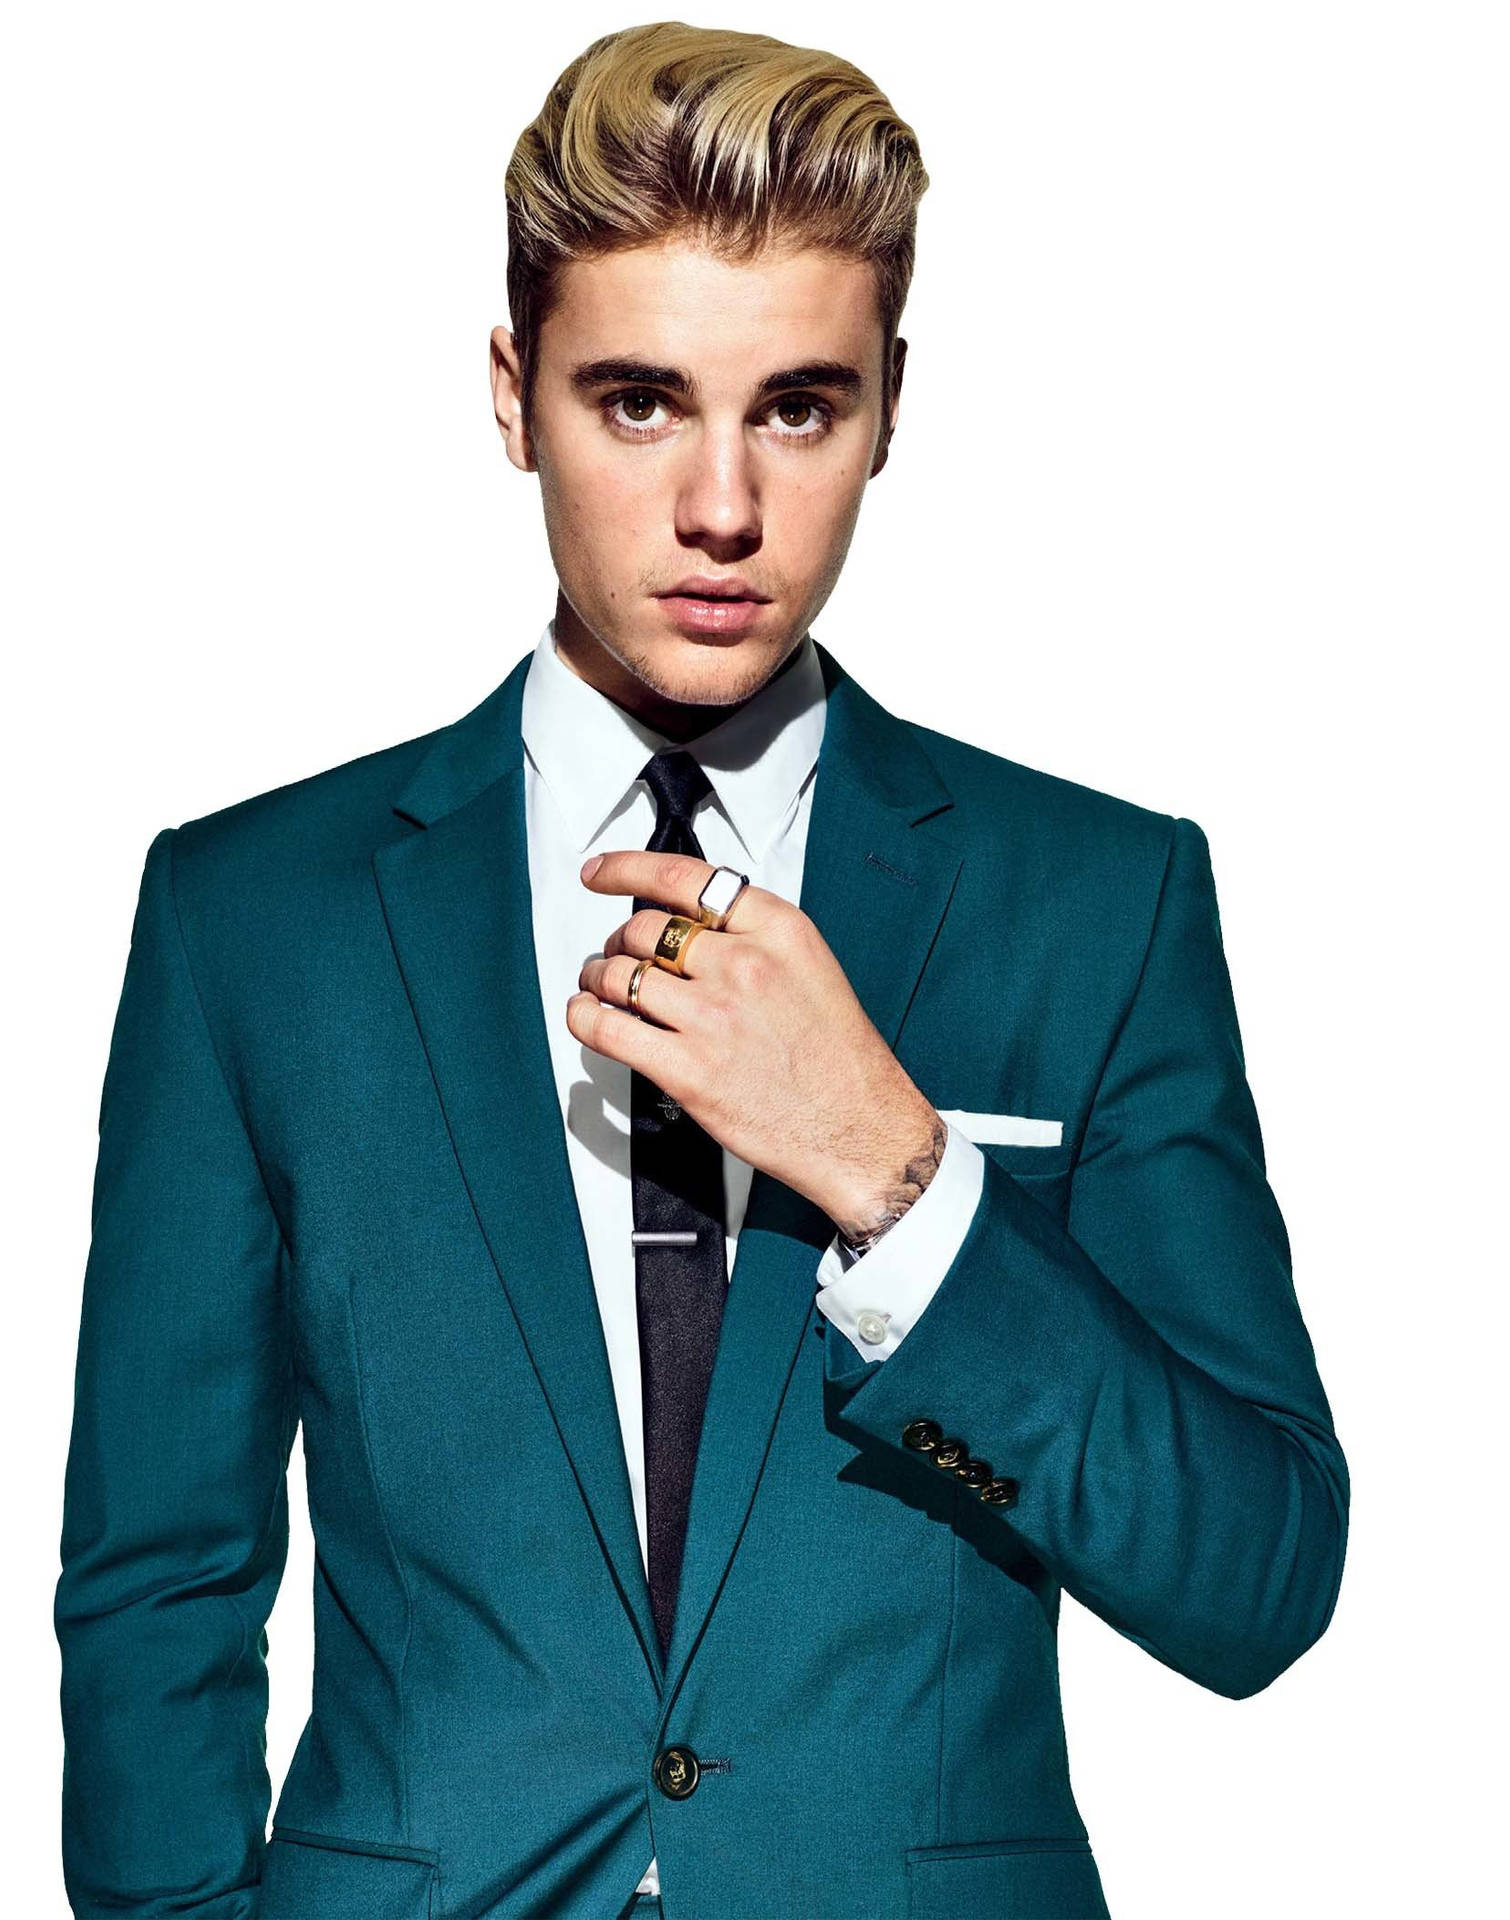 Justin Bieber In Sexy Suit Background